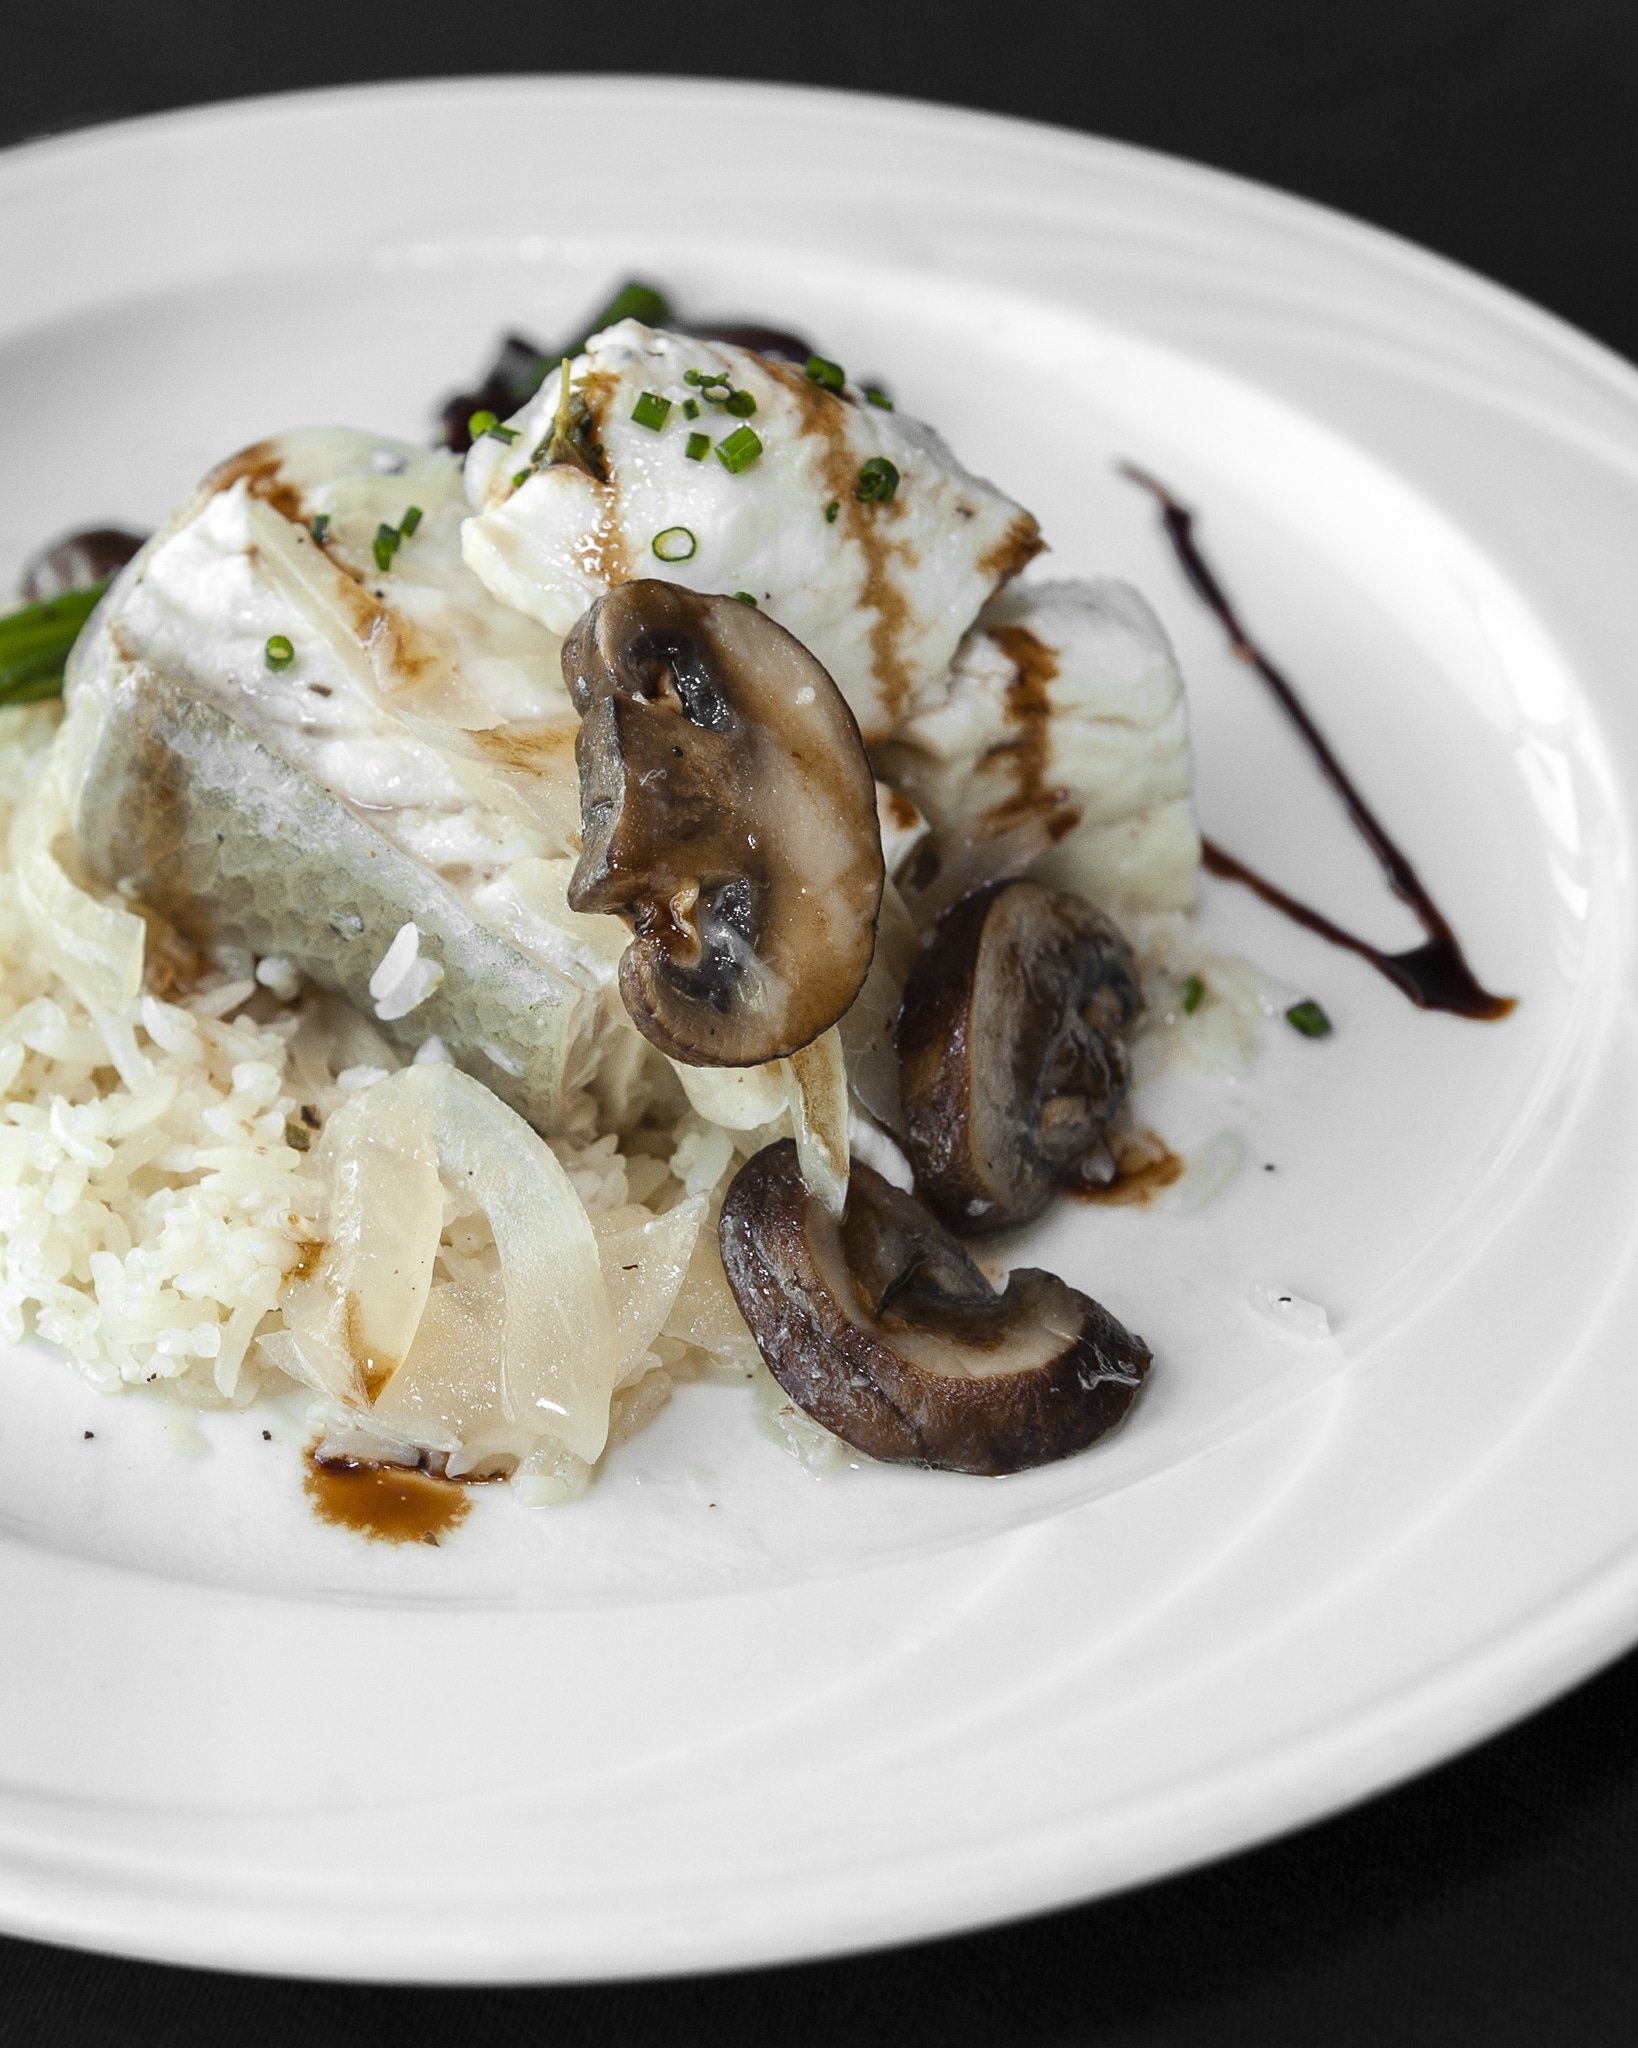 Close up of a mushroom on a plated dish of halibut with rice.